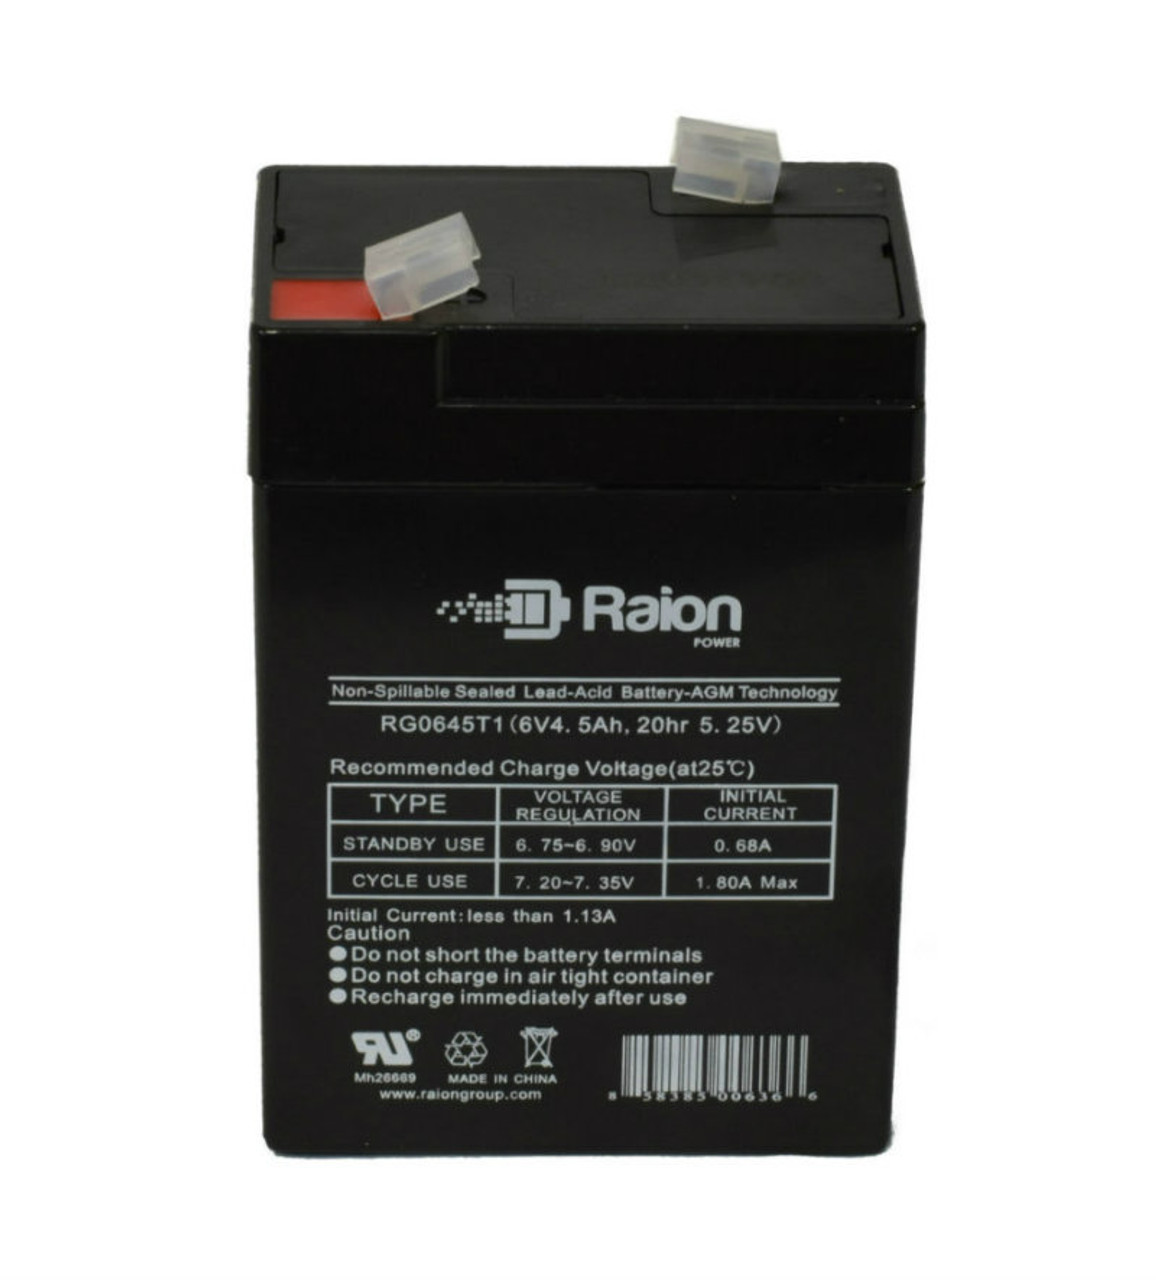 Raion Power RG0645T1 Replacement Battery Cartridge for Sentry Lite SCR-525-11